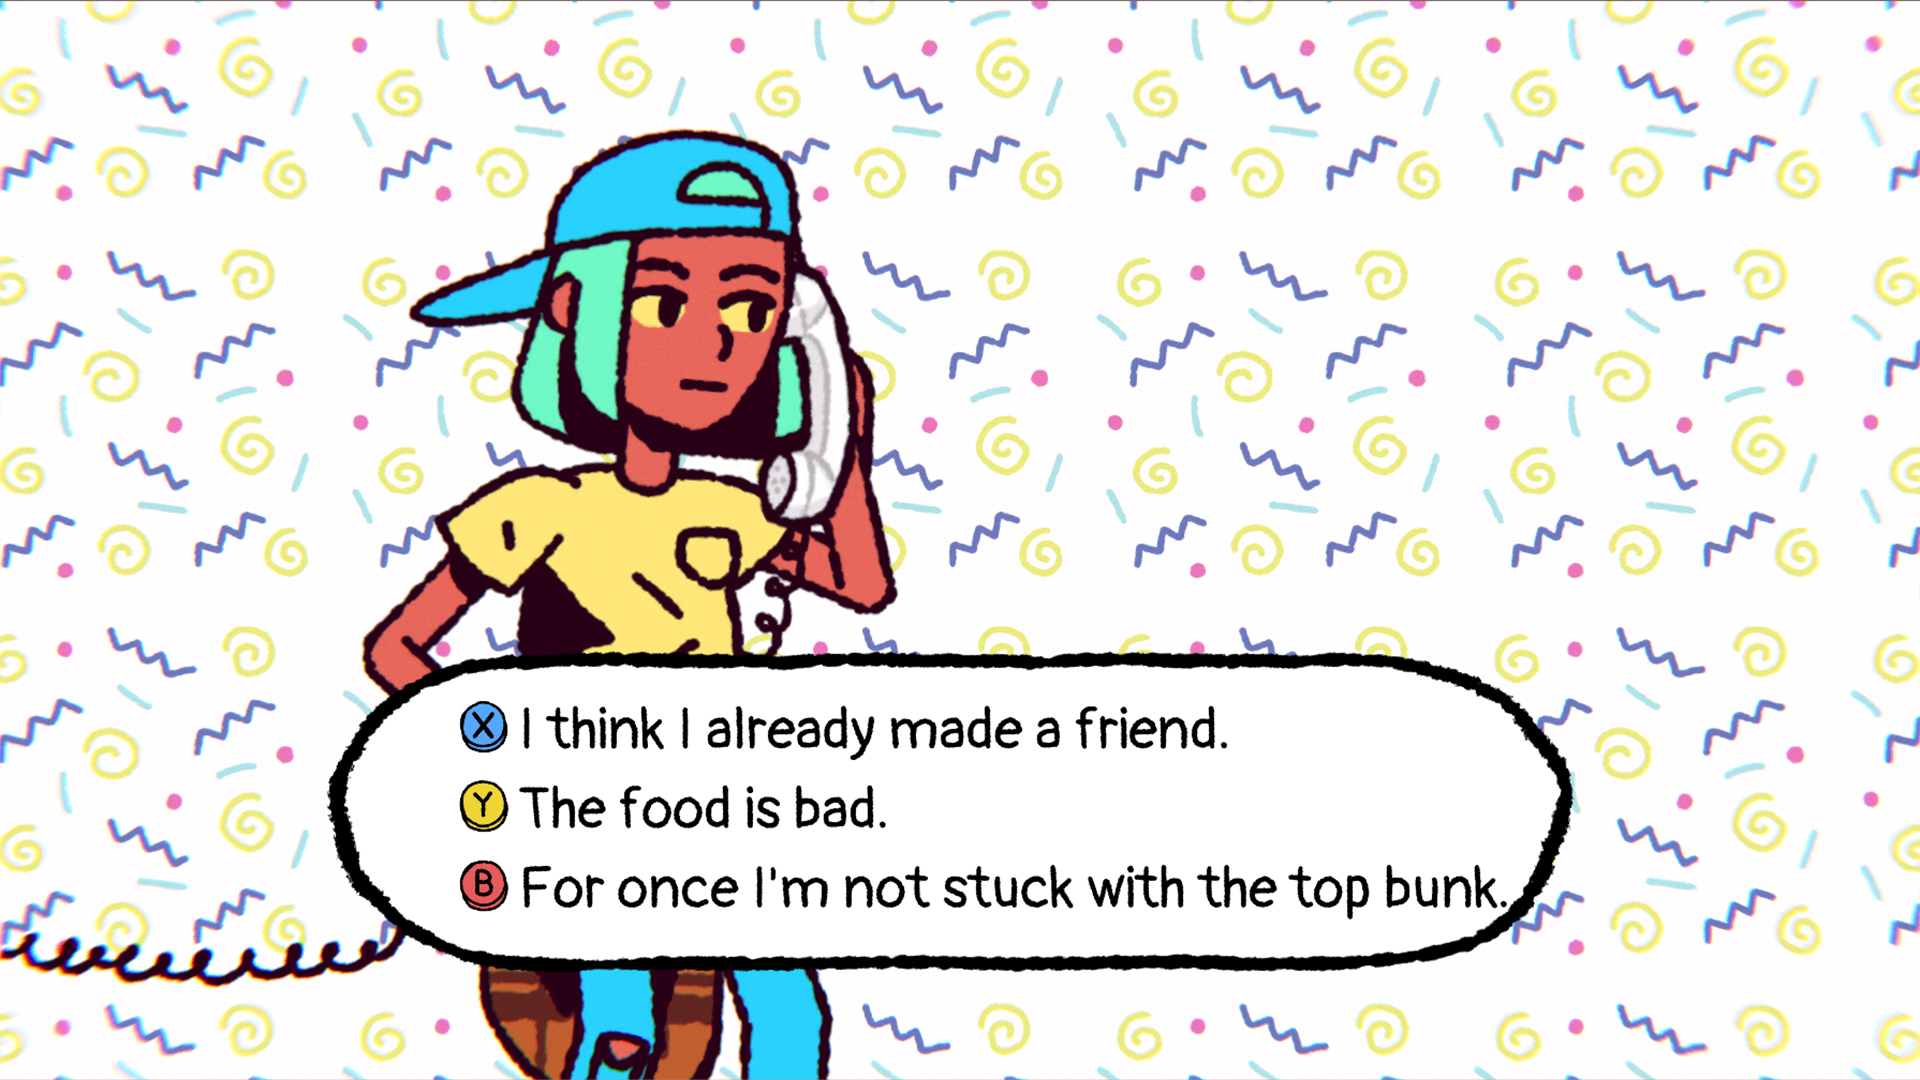 big con dialogue options, I already made a friend, the food is bad, and for once I'm not stuck with the top bunk